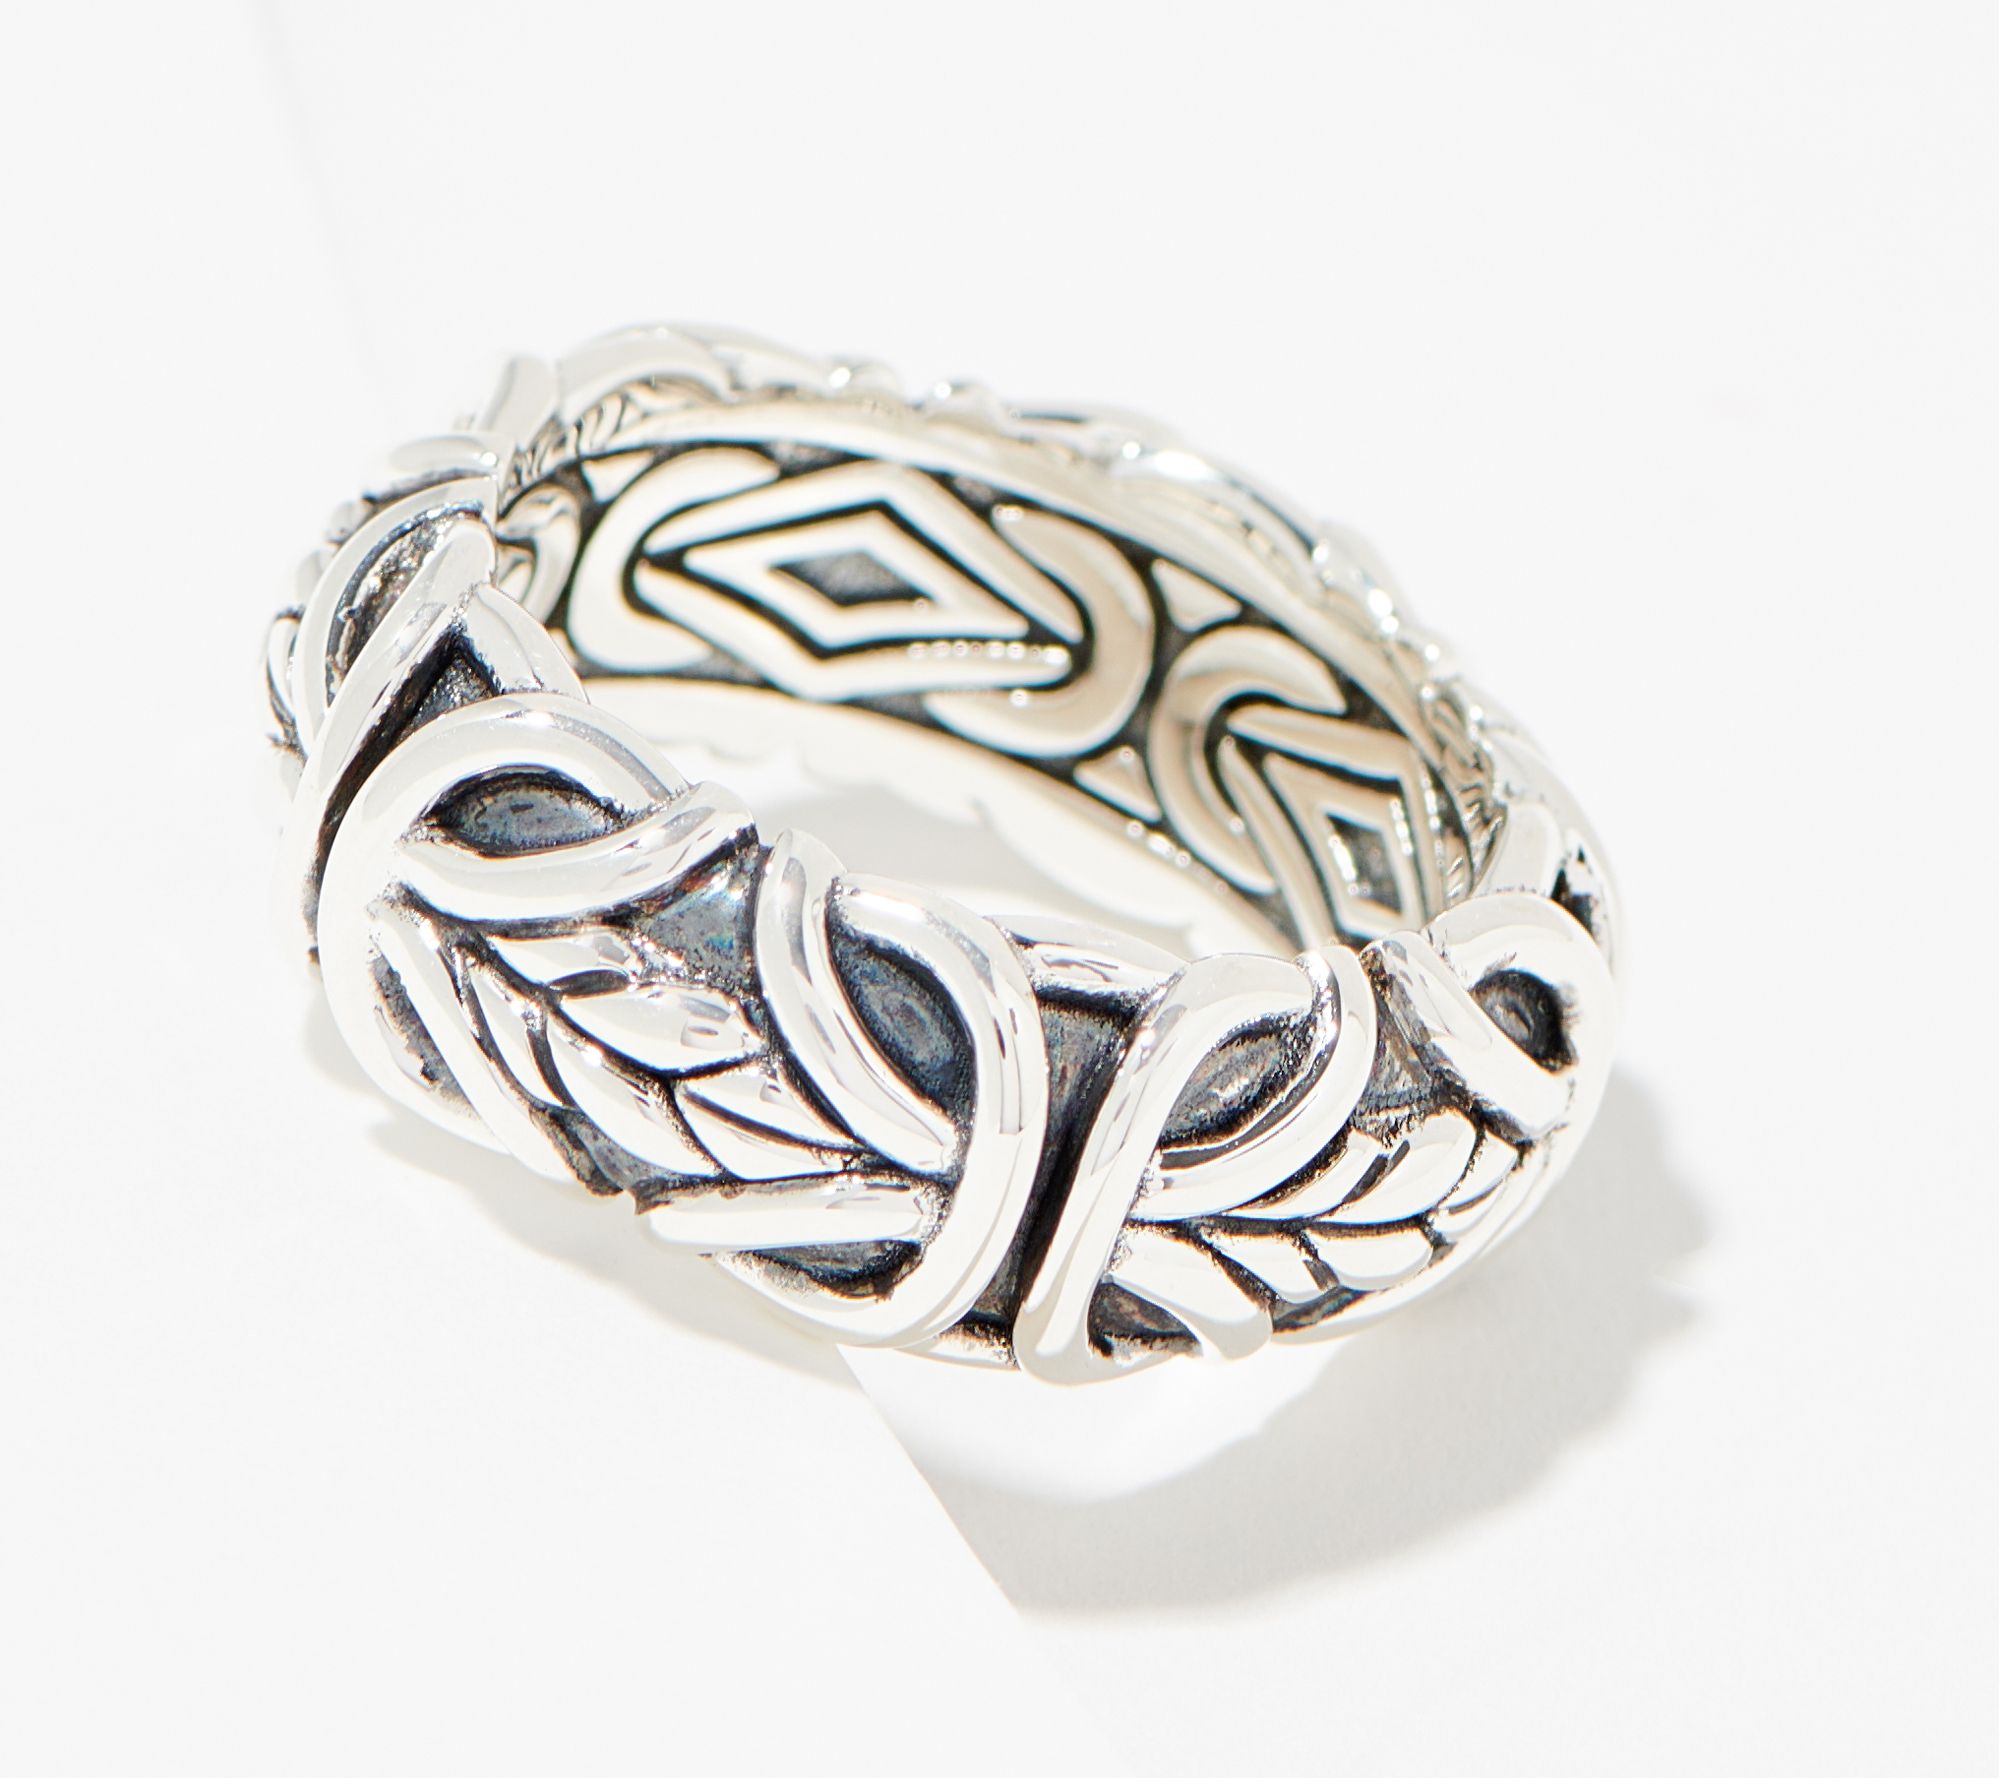 JAI Sterling Silver Carved Byzantine Band Ring - QVC.com